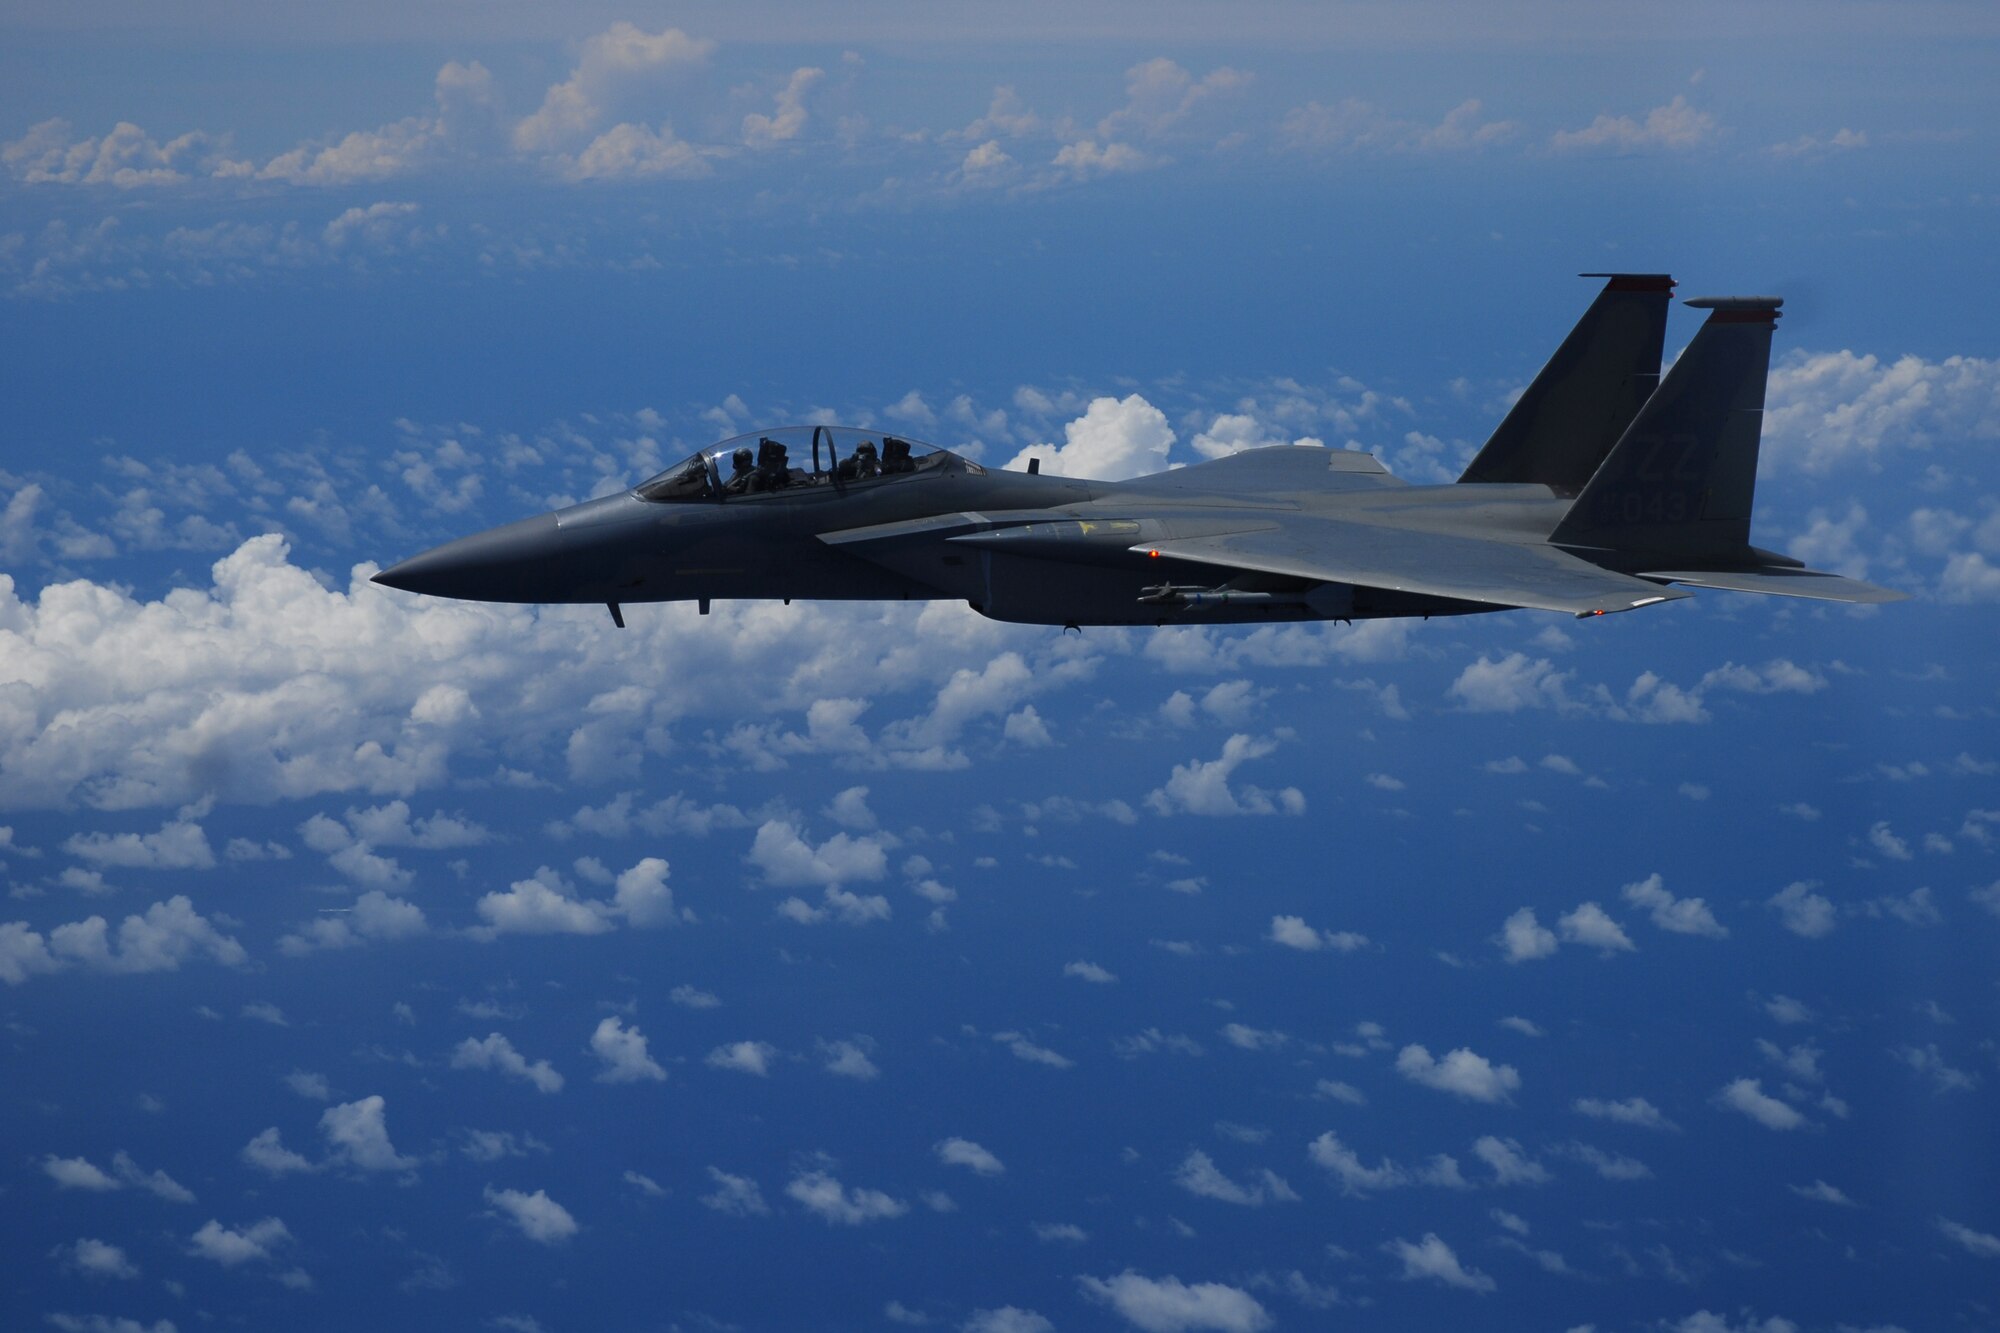 An F-15C Eagle from the 44th Fighter Squadron, Kadena Air Base, flies over the island of Okinawa, Japan July 22, 2009. The mission took place during a total solar eclipse, a rare opportunity for service members stationed here to witness this unique event. (U.S. Air Force photo/Airman 1st Class Chad Warren)